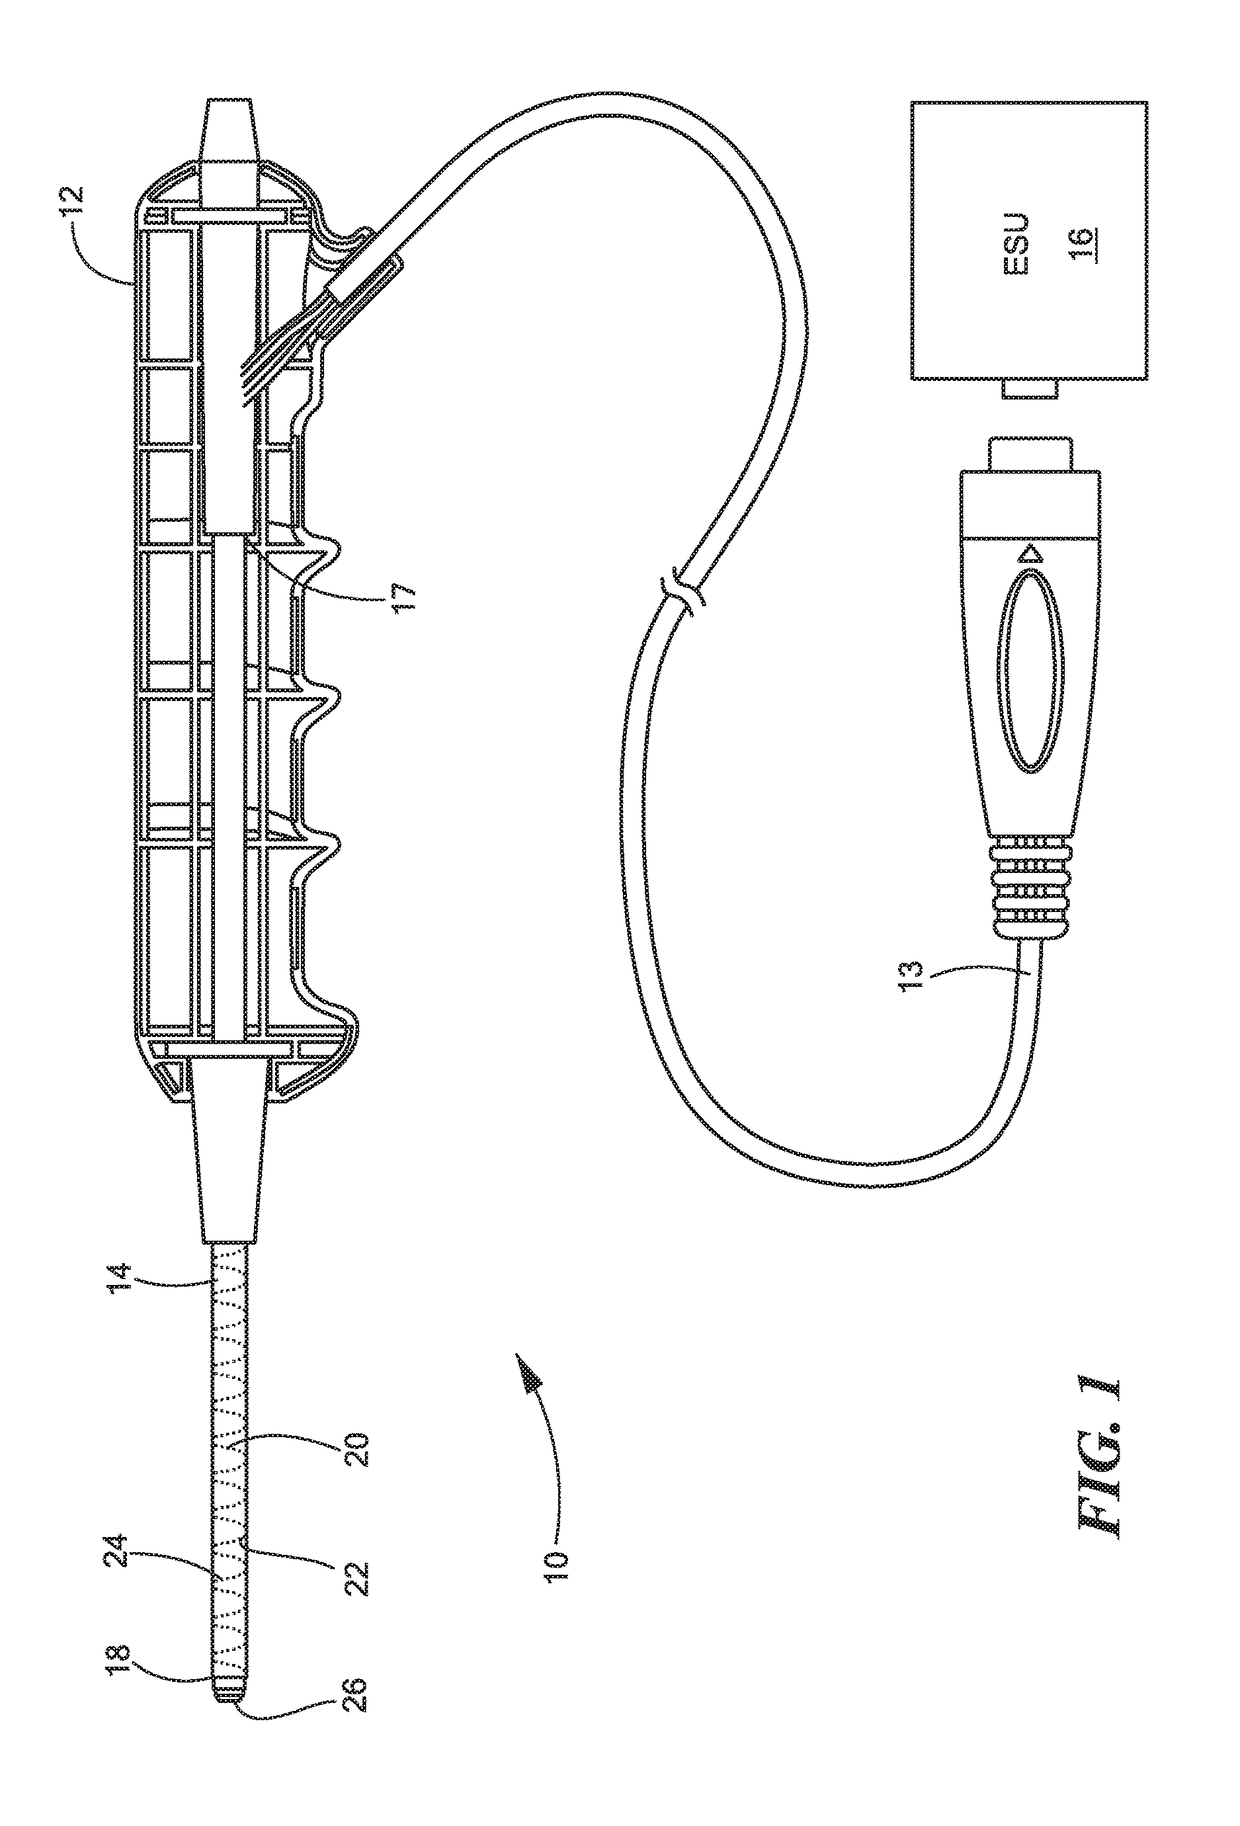 Device for medical lead extraction